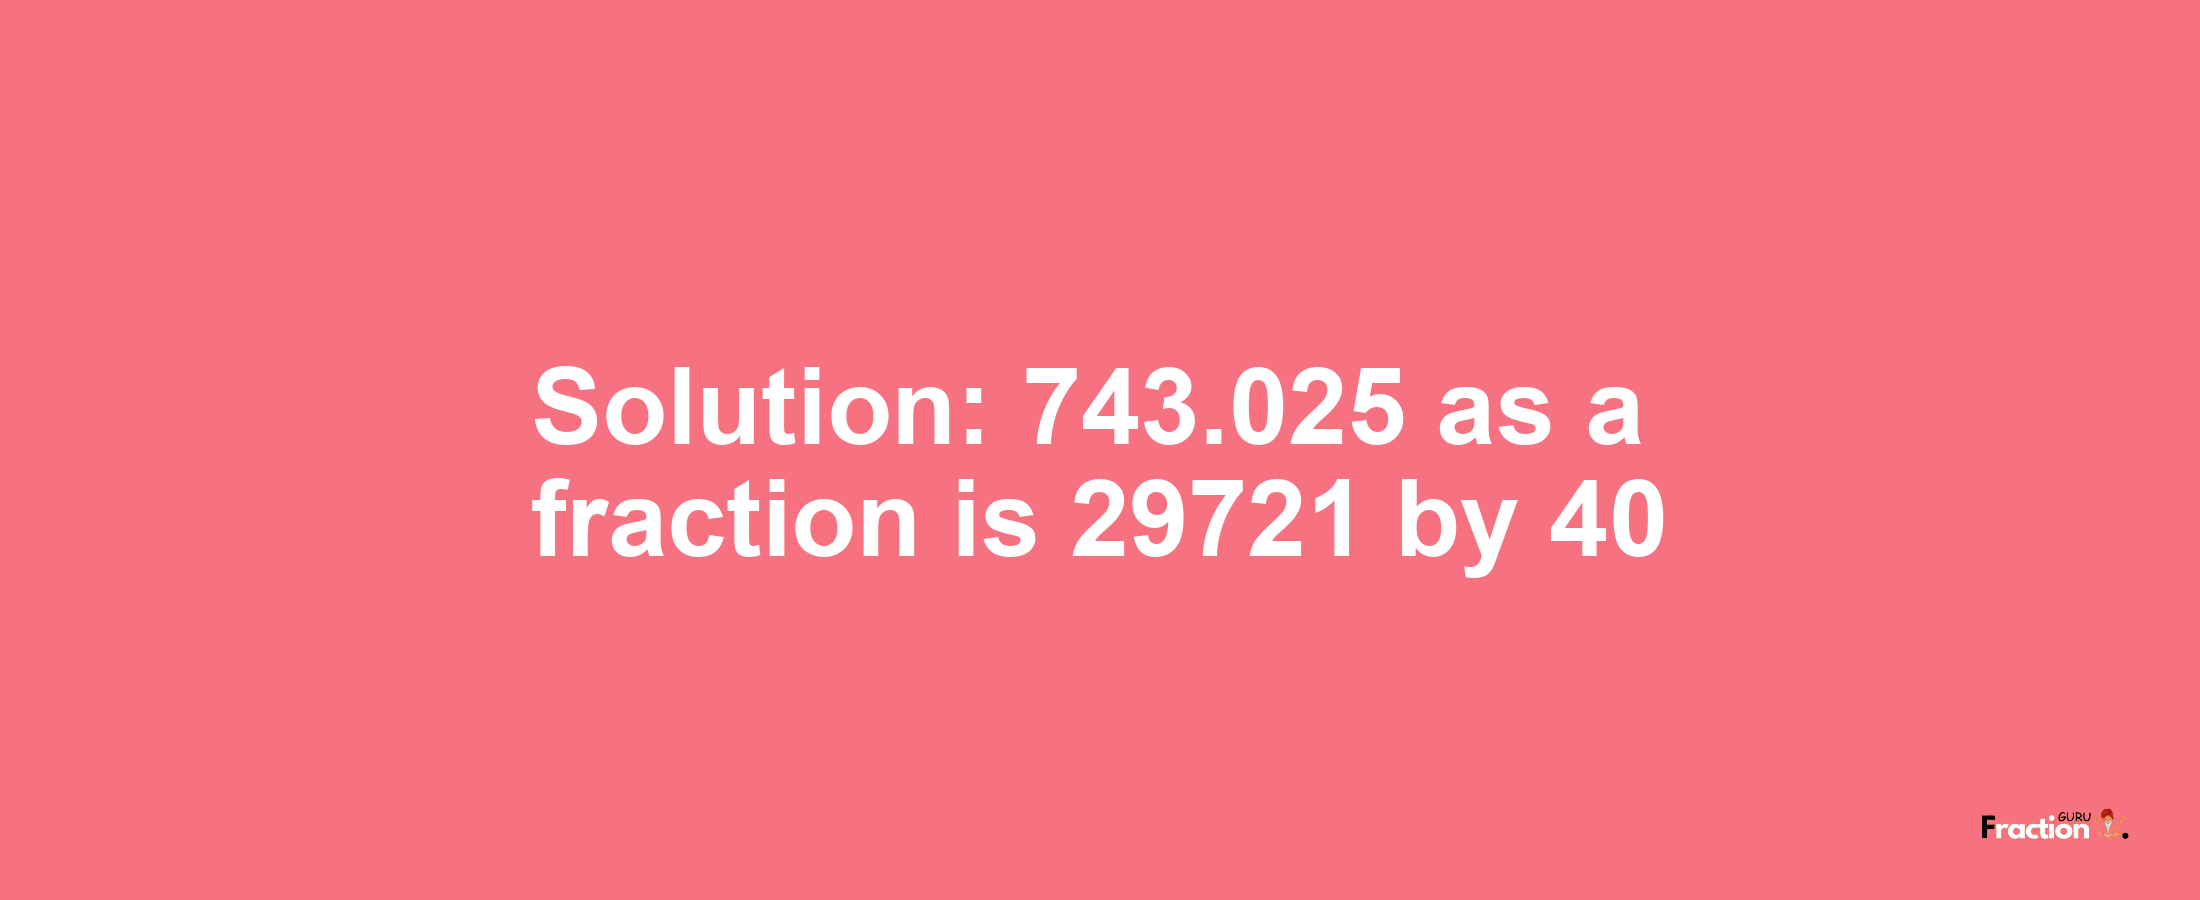 Solution:743.025 as a fraction is 29721/40